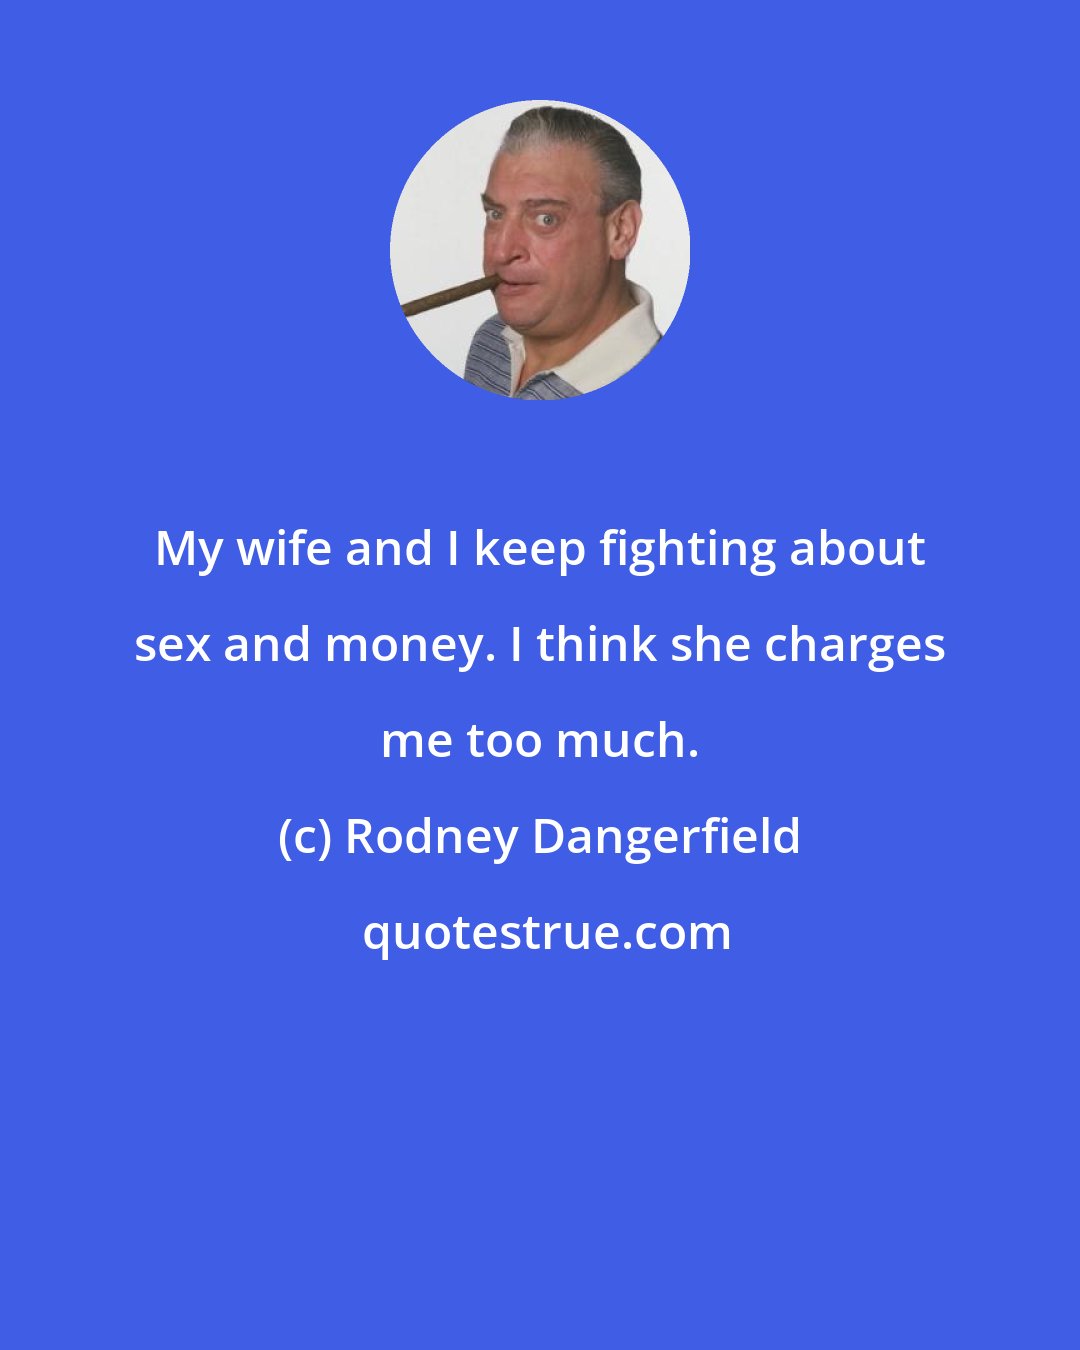 Rodney Dangerfield: My wife and I keep fighting about sex and money. I think she charges me too much.